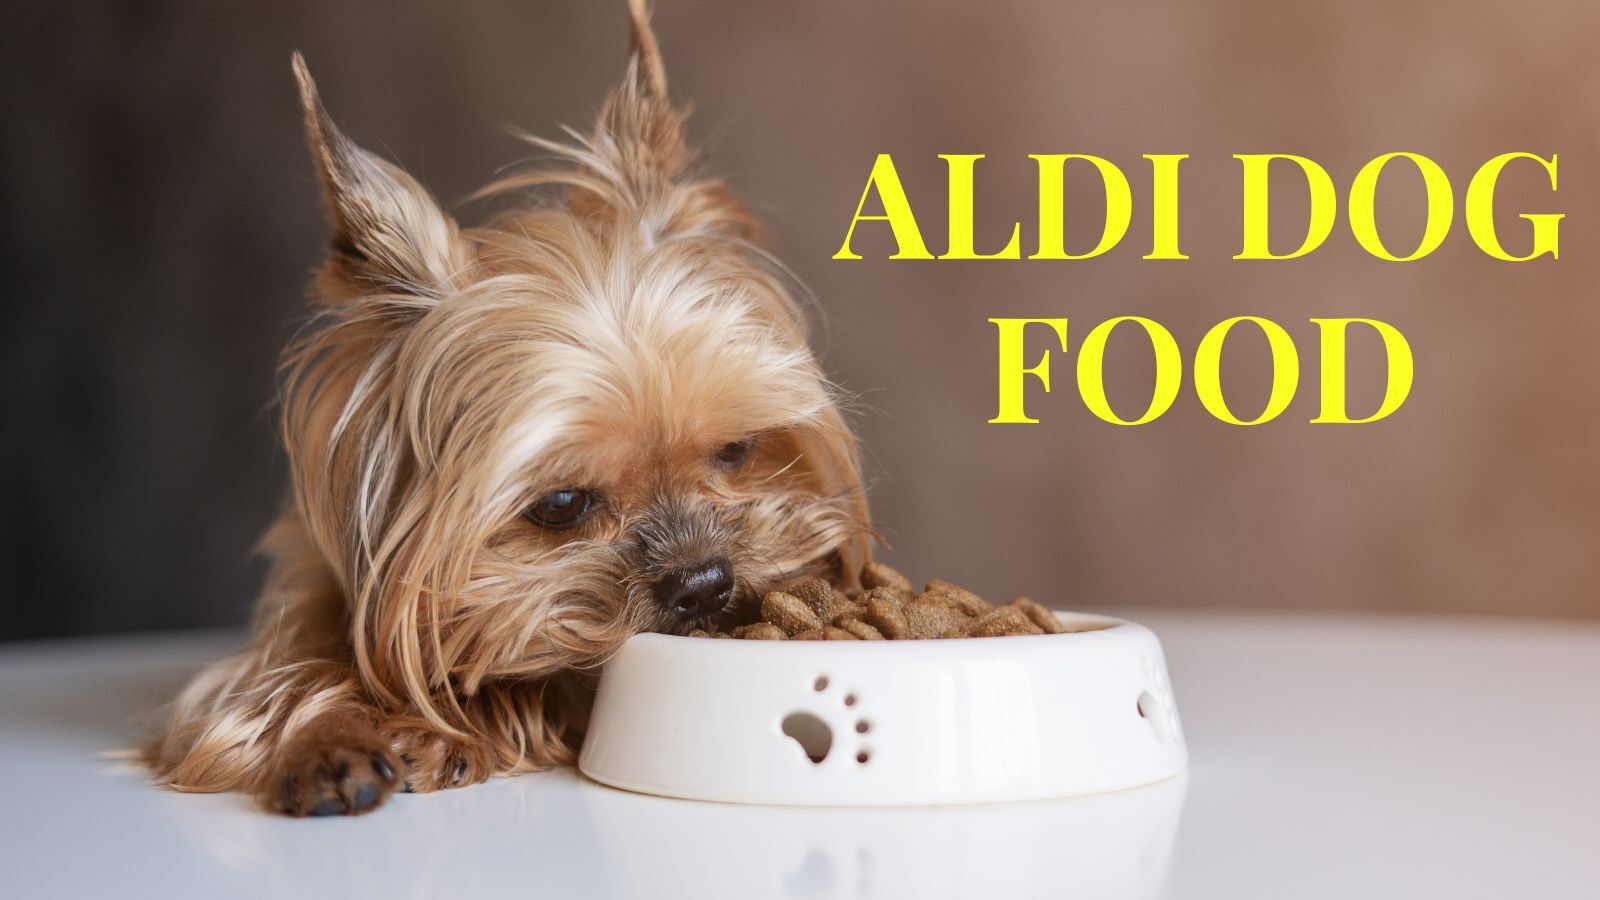 ALDI Dog Food (Types and Ingredients)